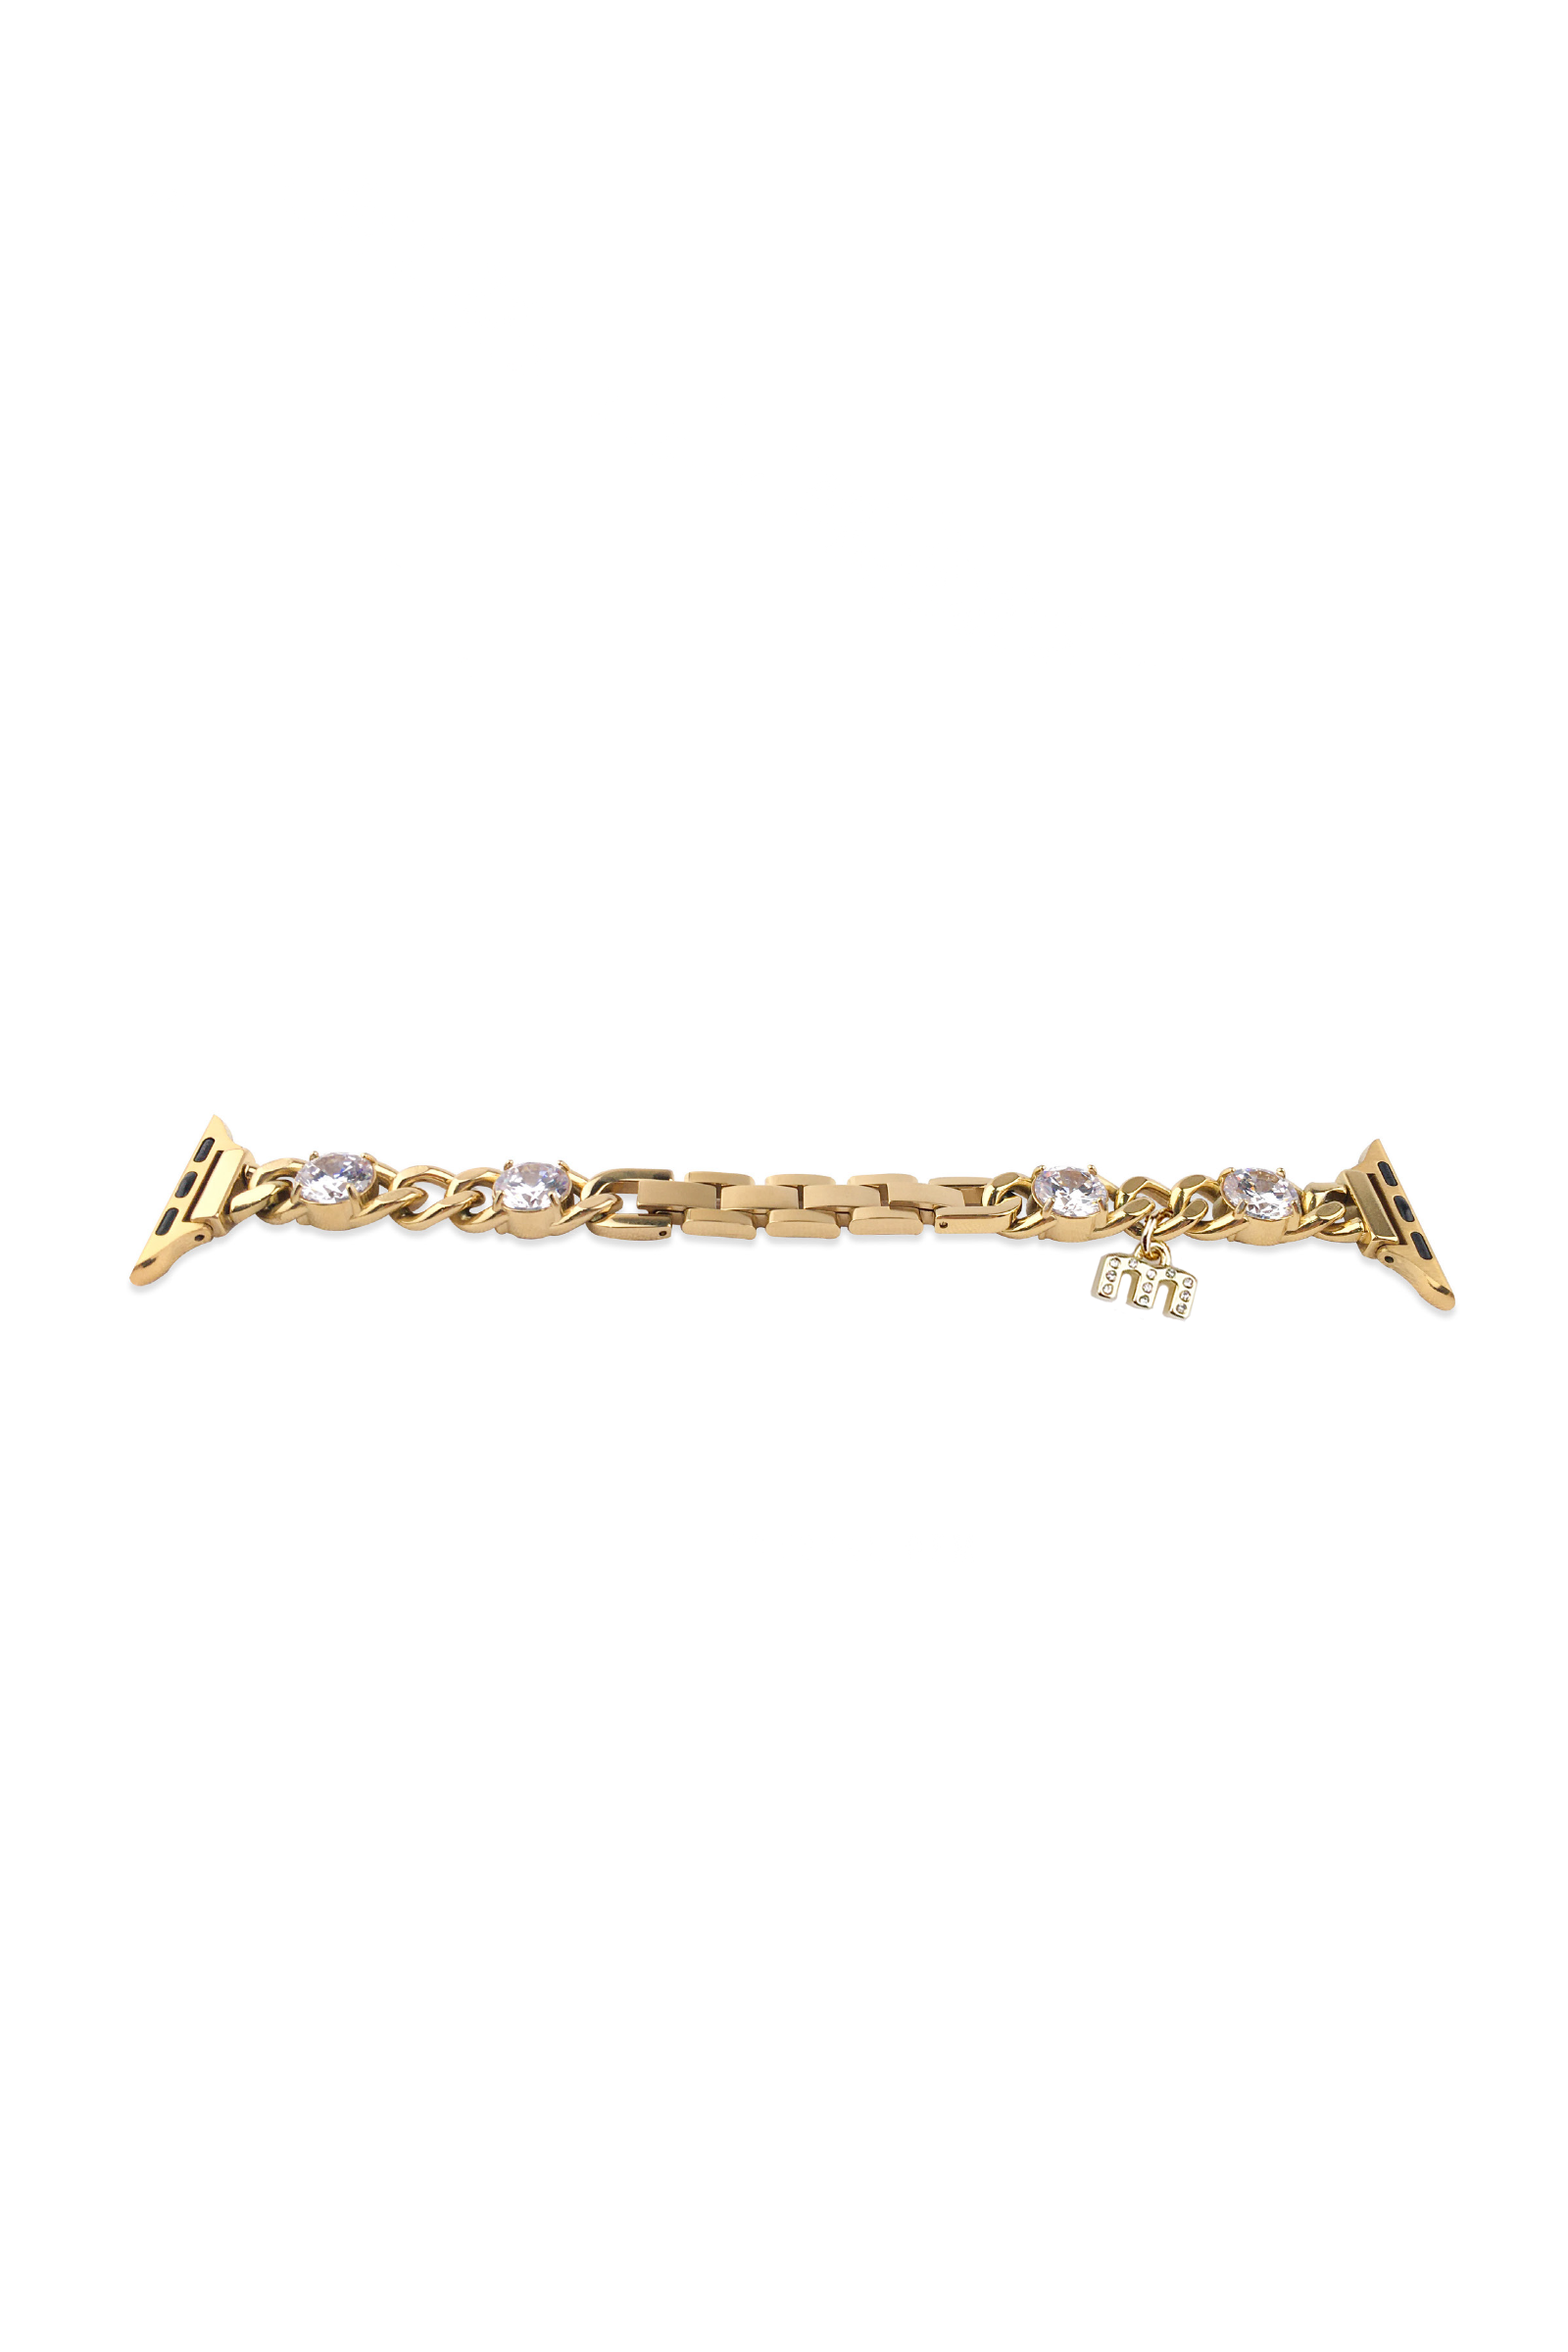 GOLD CRYSTAL APPLE WATCH STRAP